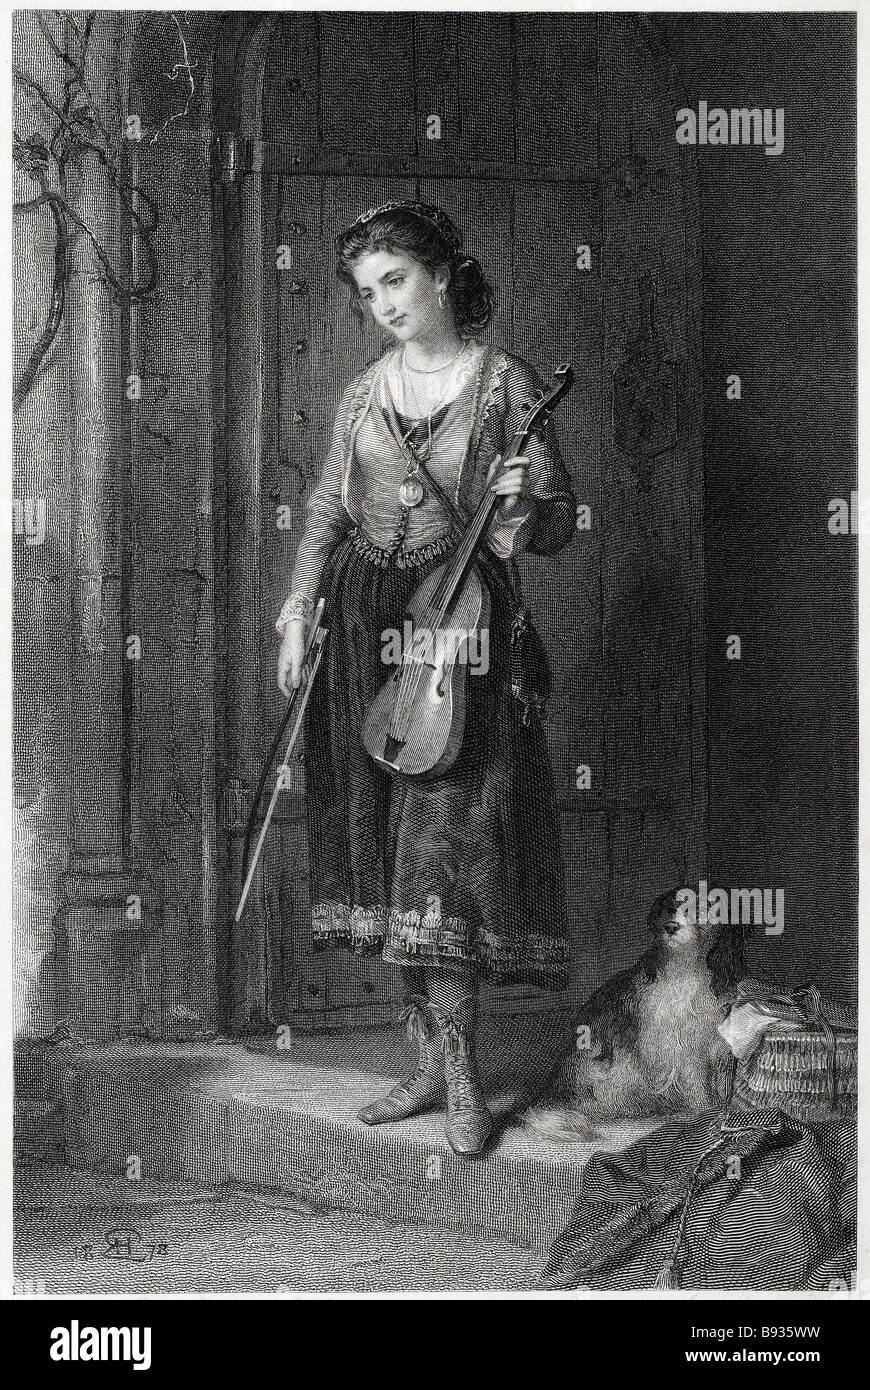 the glee maiden violin musician girl period dress playing instrument doorway dog woman traditional clothing possing house child Stock Photo